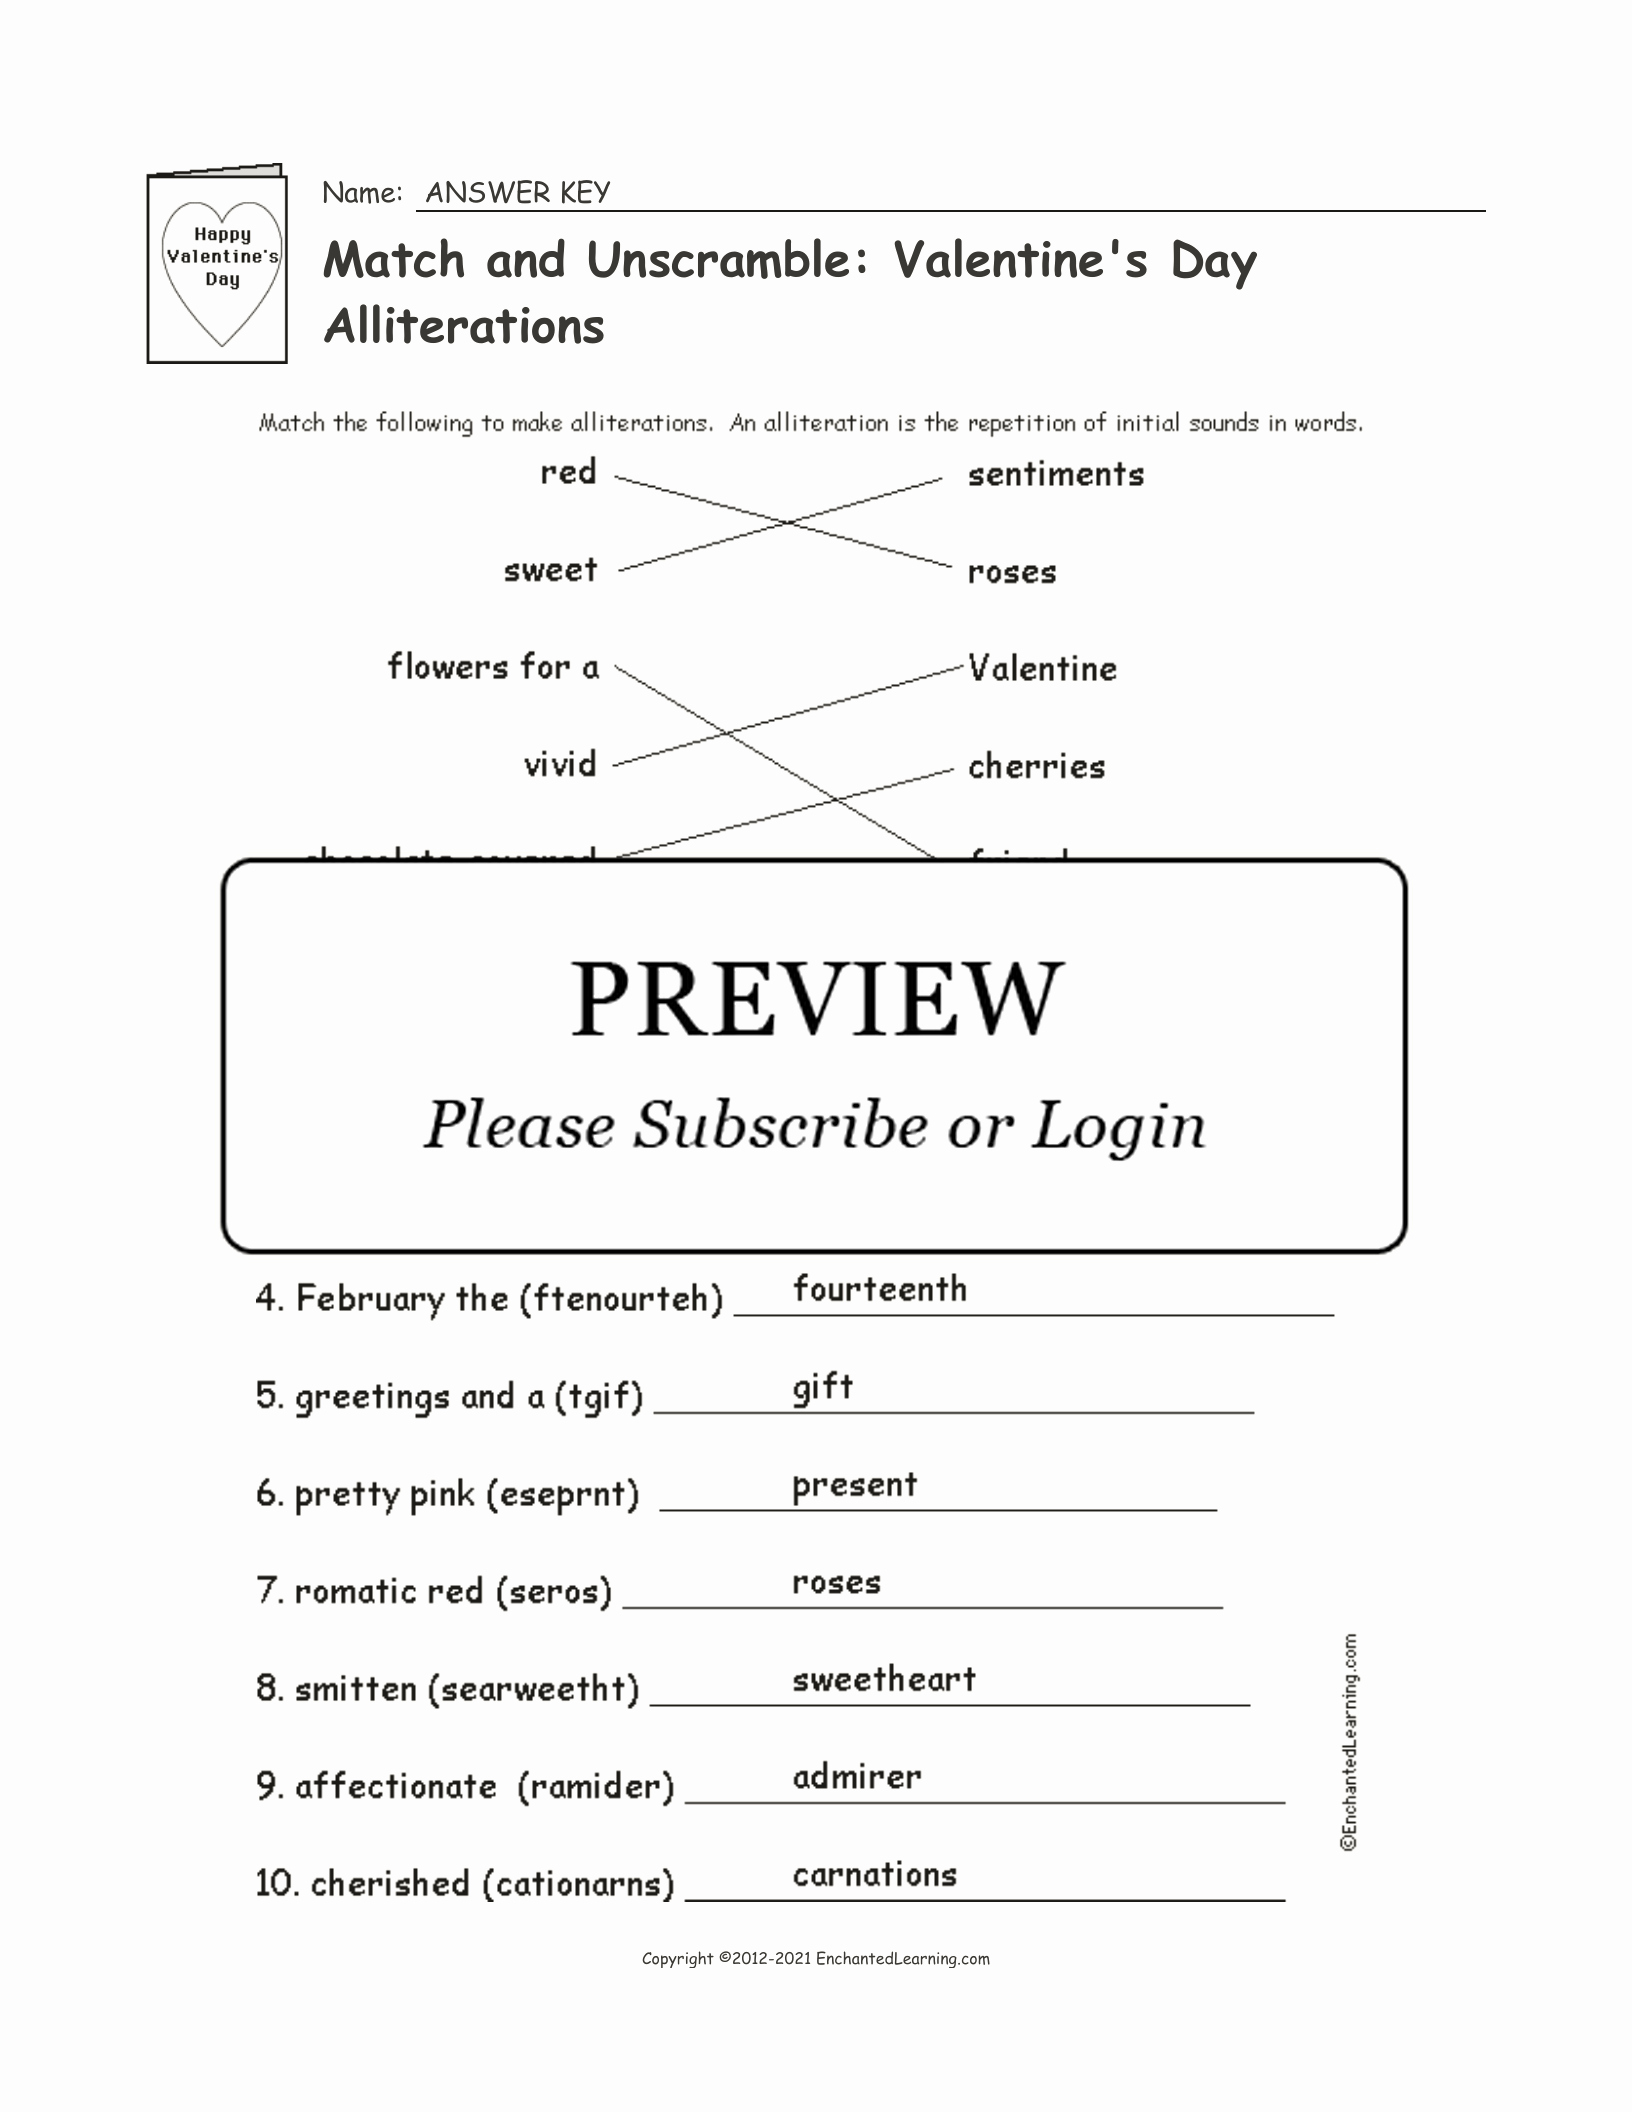 Alliteration Worksheets with Answers Unique Match and Unscramble Valentine S Day Alliterations